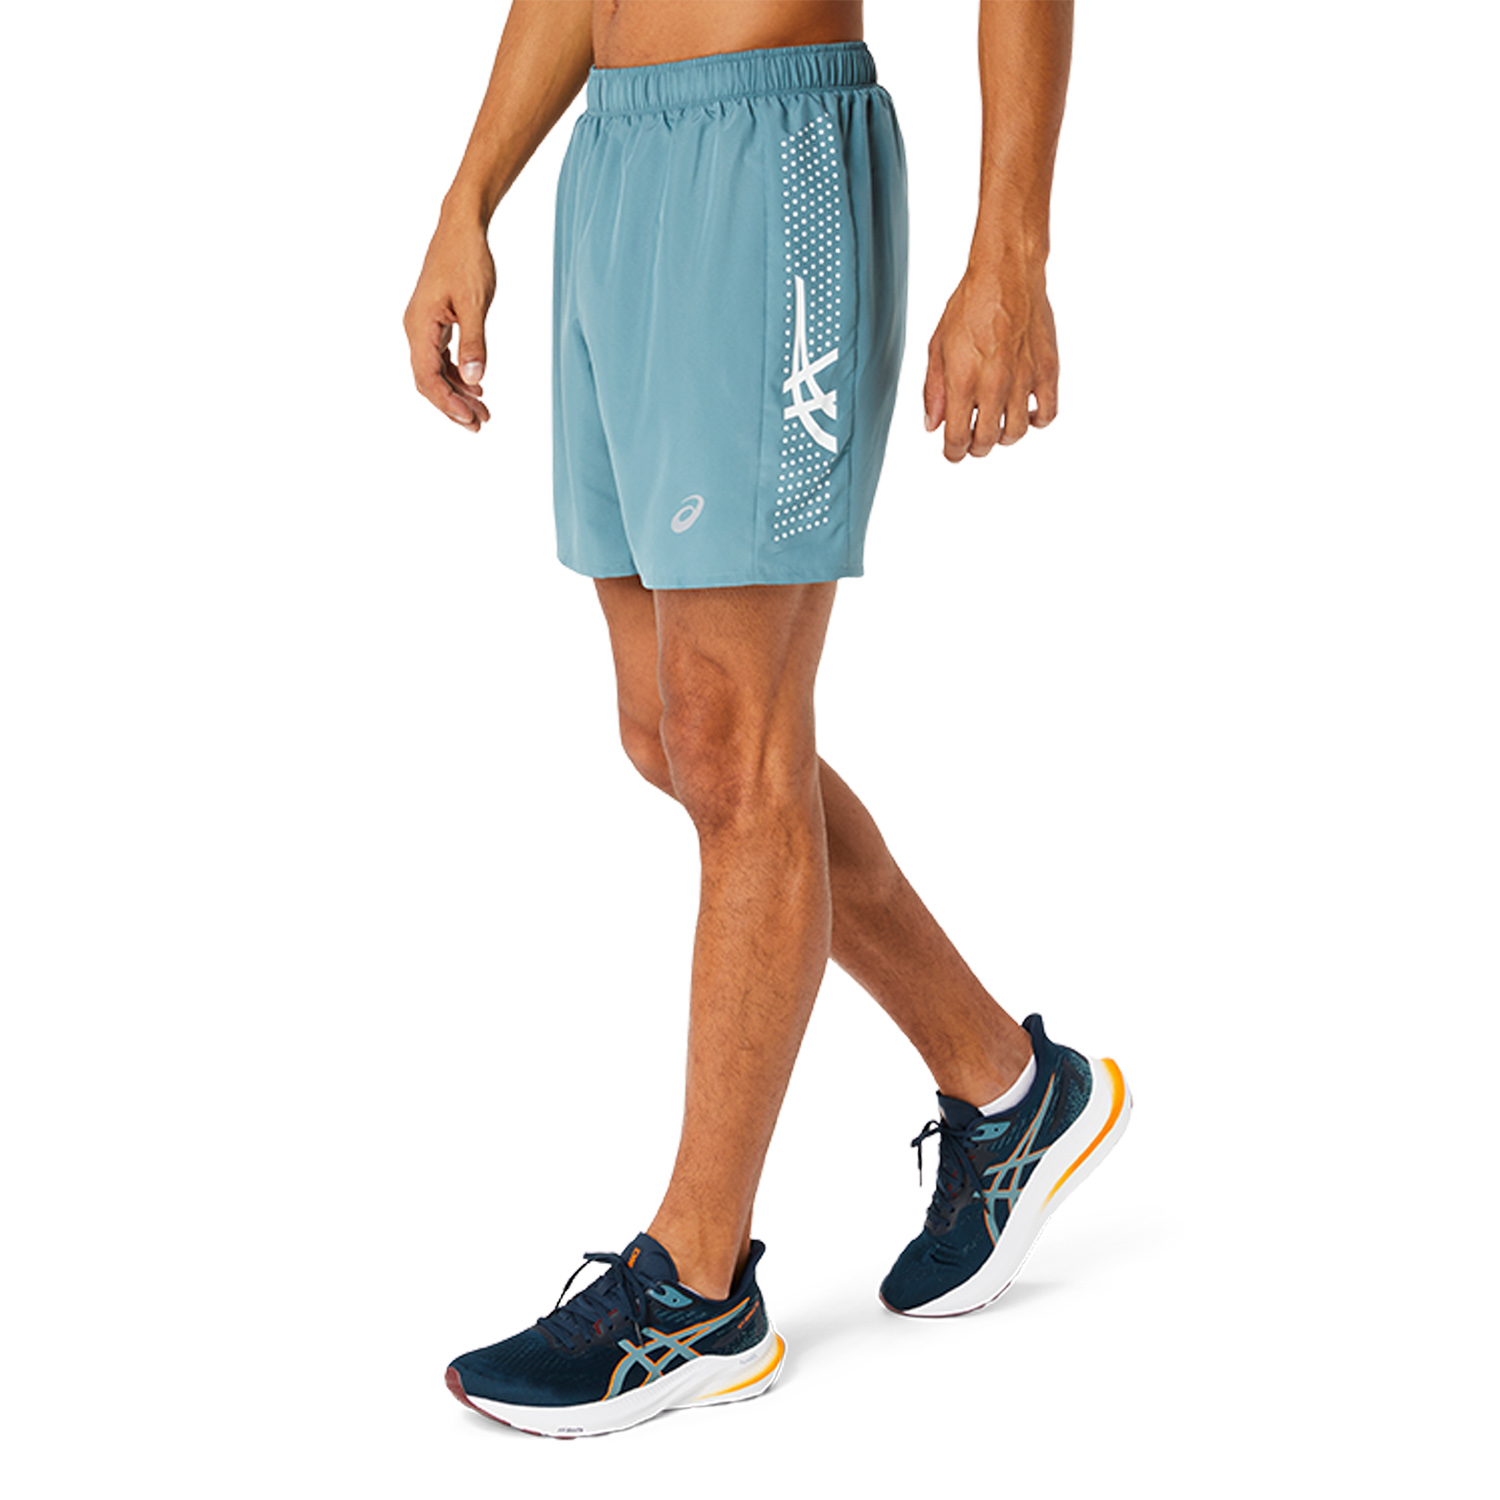 Asics Icon 7in Shorts - Foggy Teal/Brilliant White